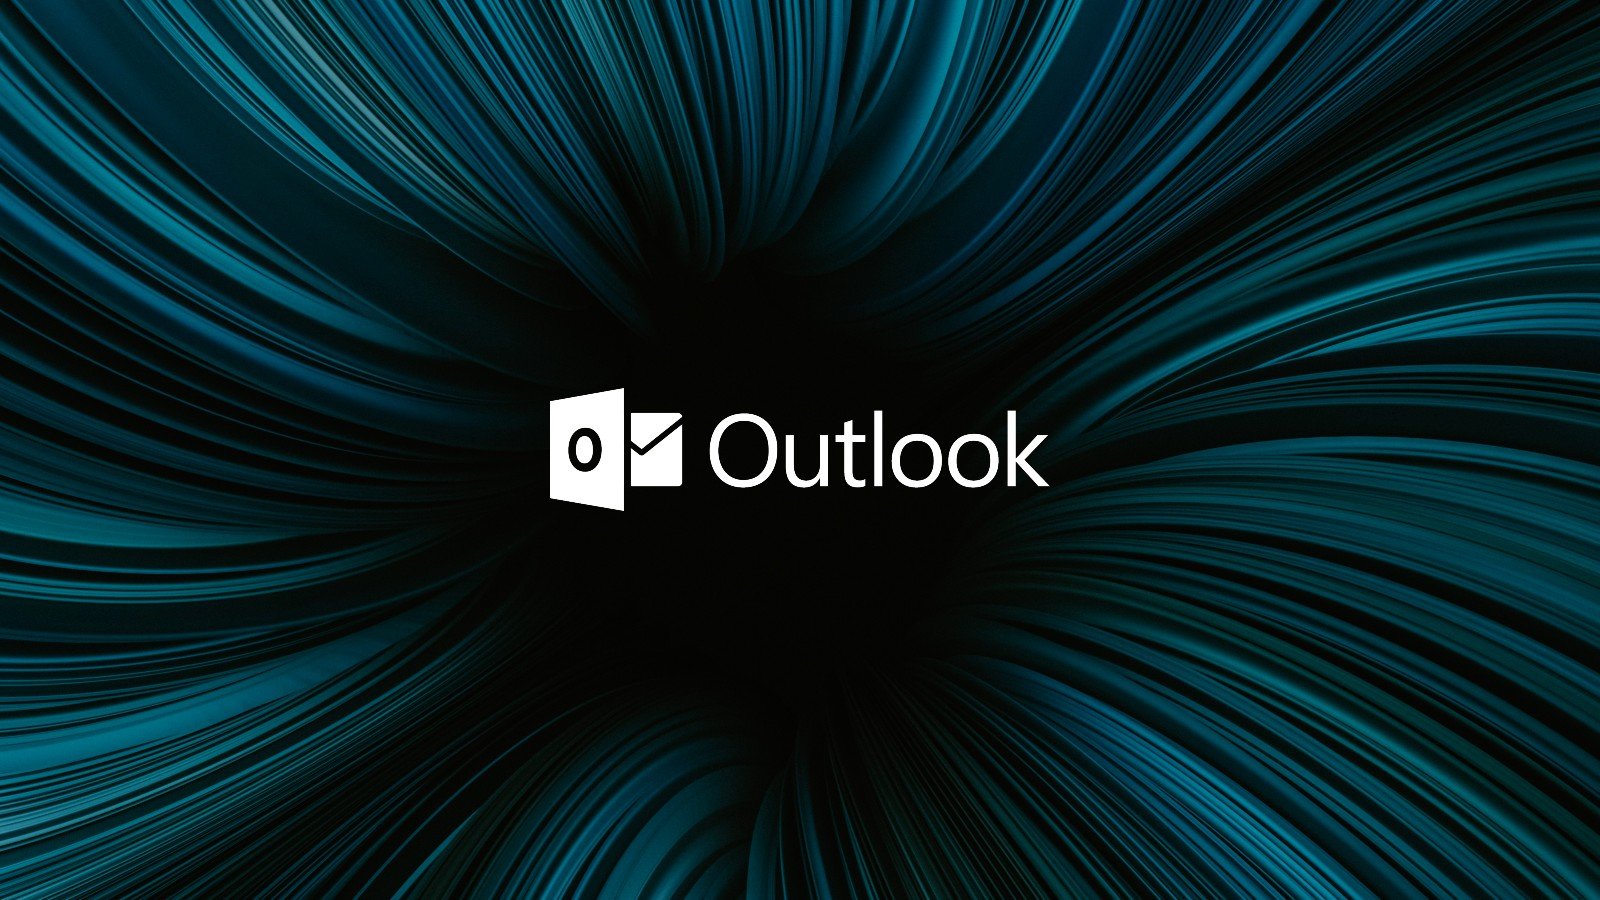 Critical Microsoft Outlook bug PoC shows how easy it is to exploit